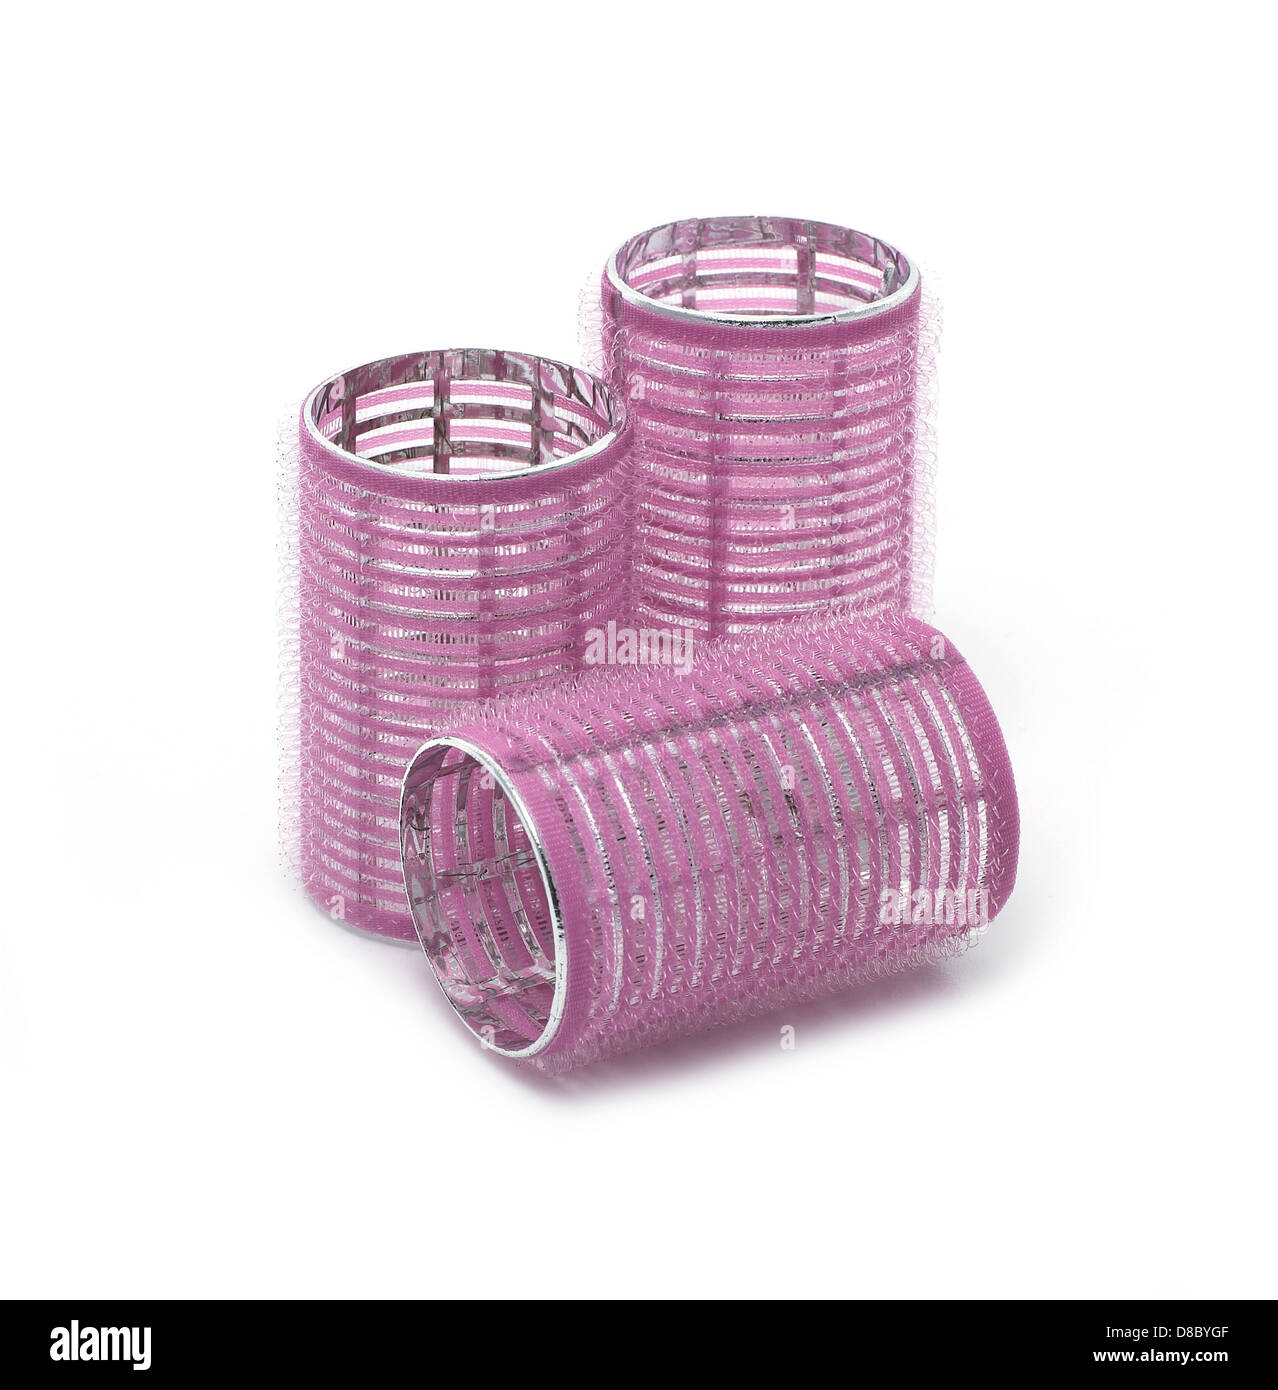 purple hair rollers cut out onto a white background Stock Photo